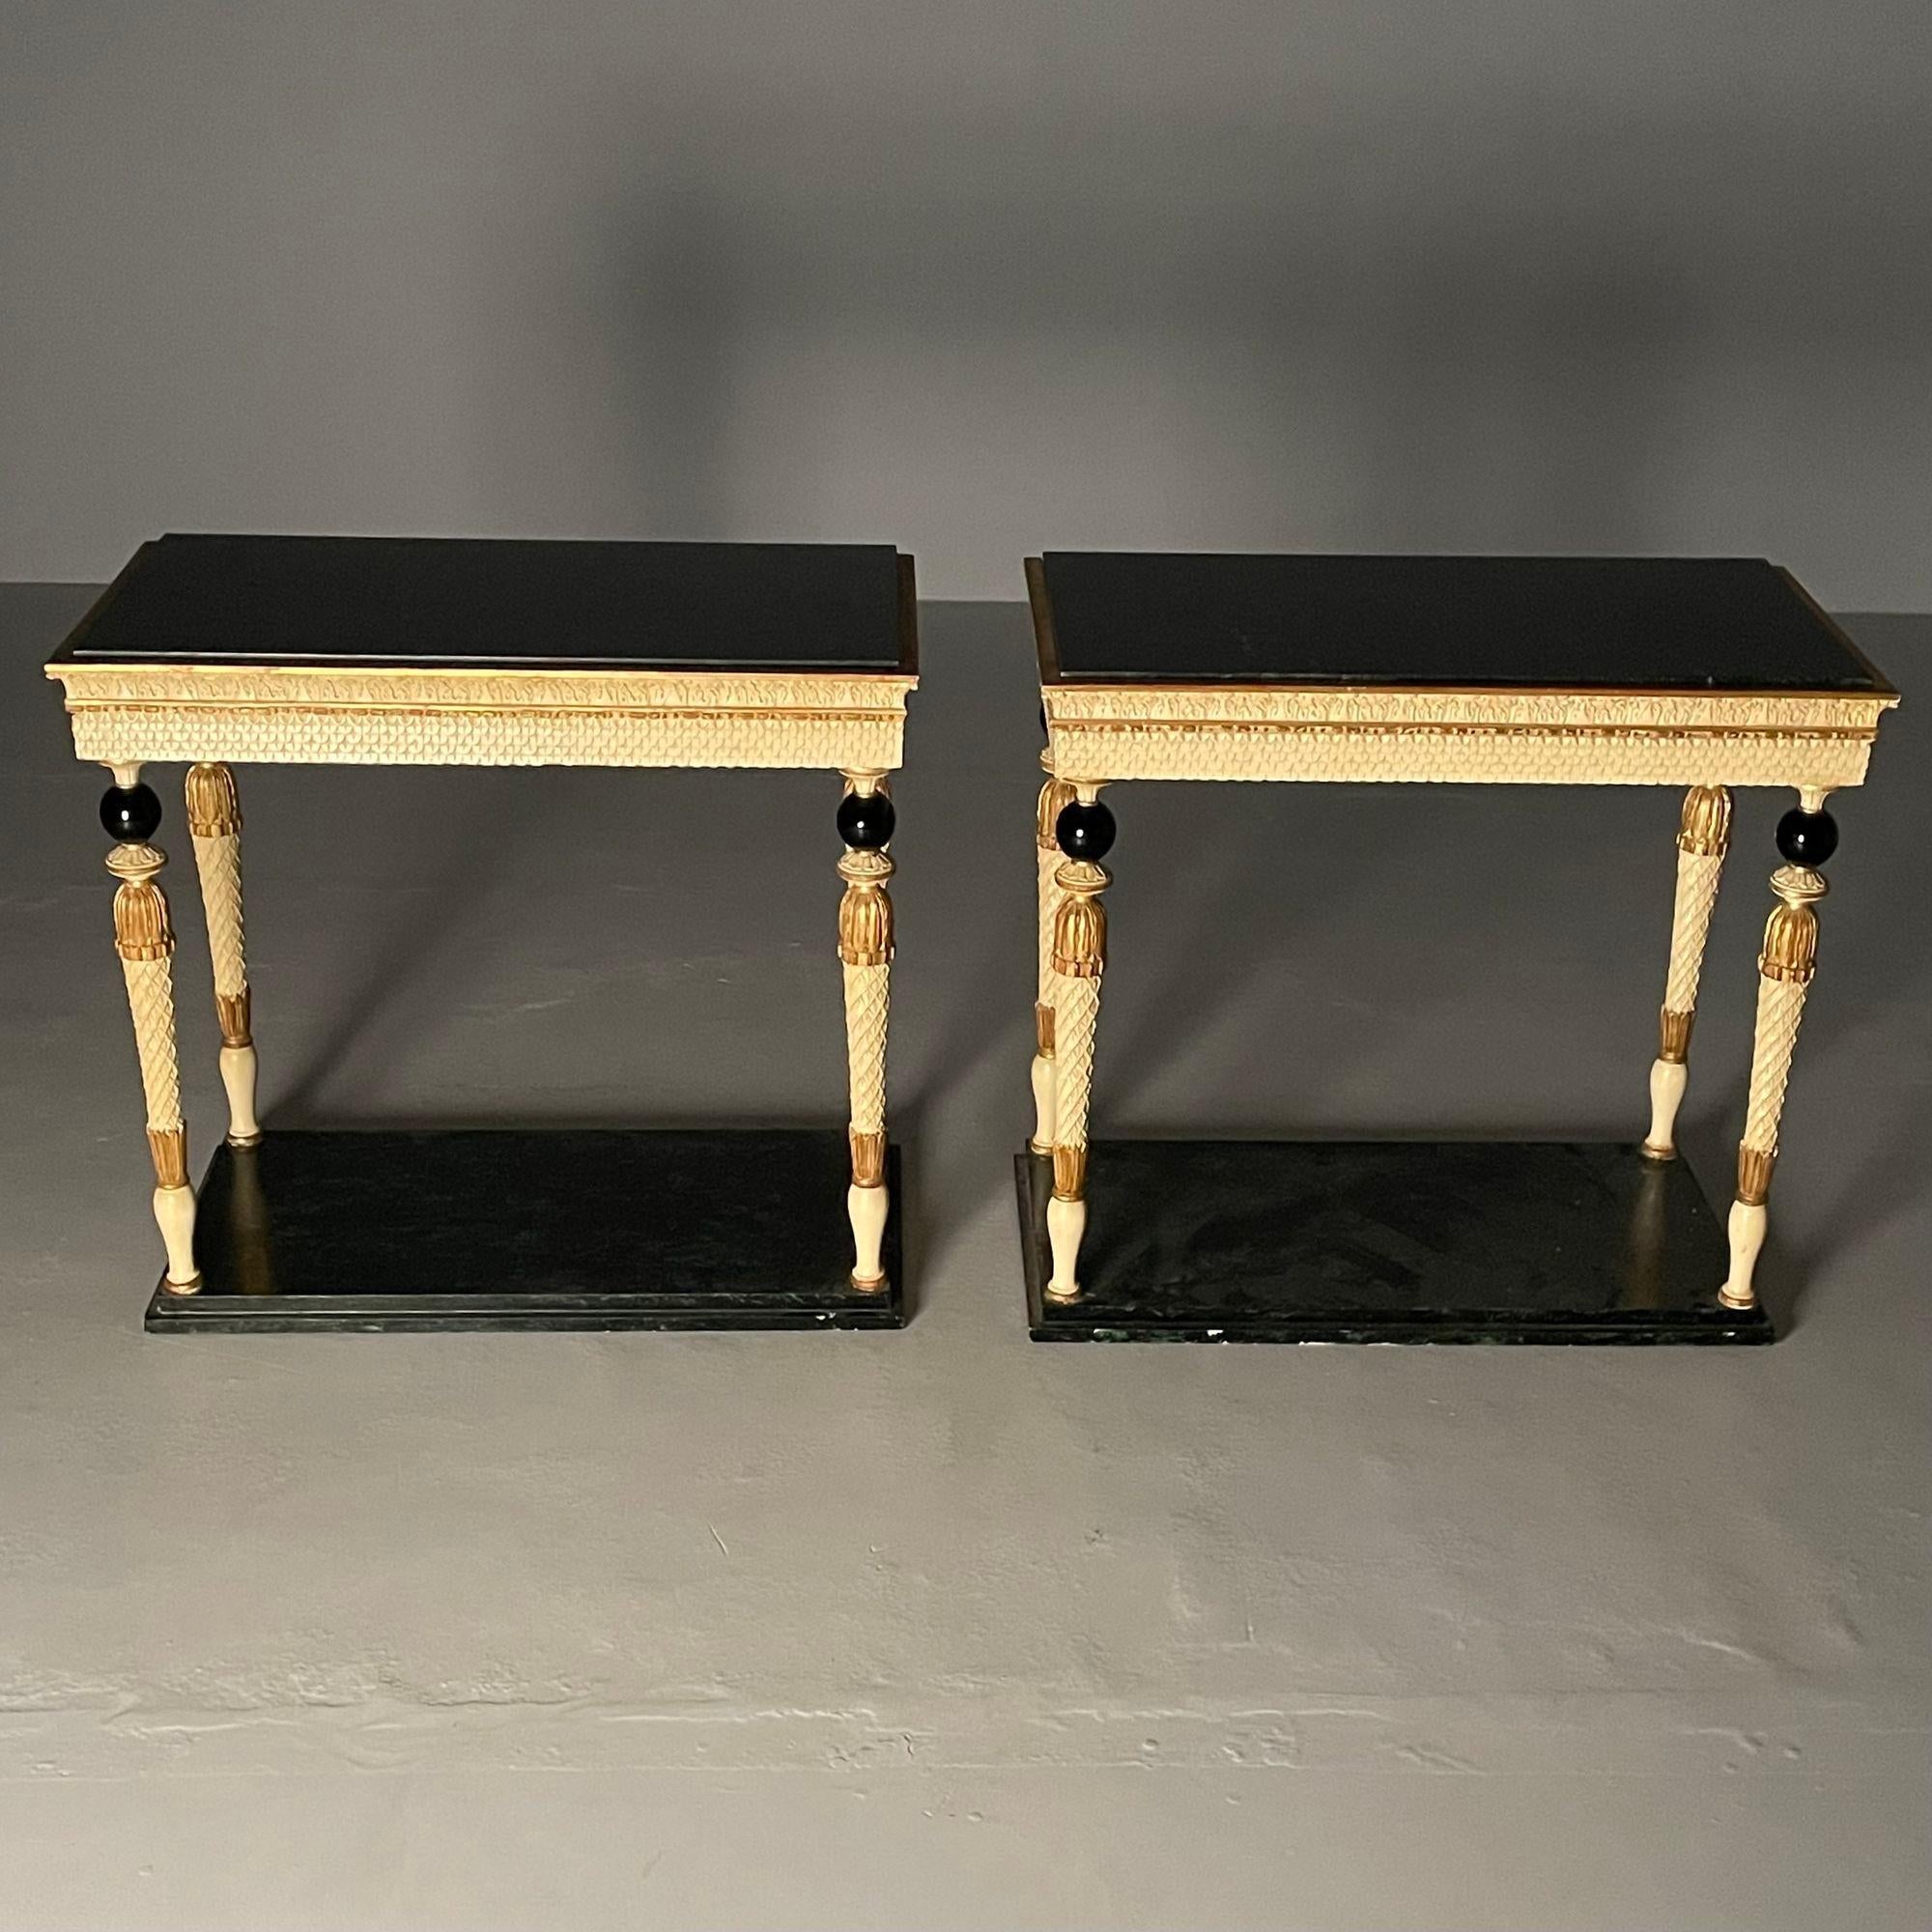 Mid-20th Century Maison Jansen, Swedish Neoclassical, Console Tables, Marble, Painted Wood, 1960s For Sale